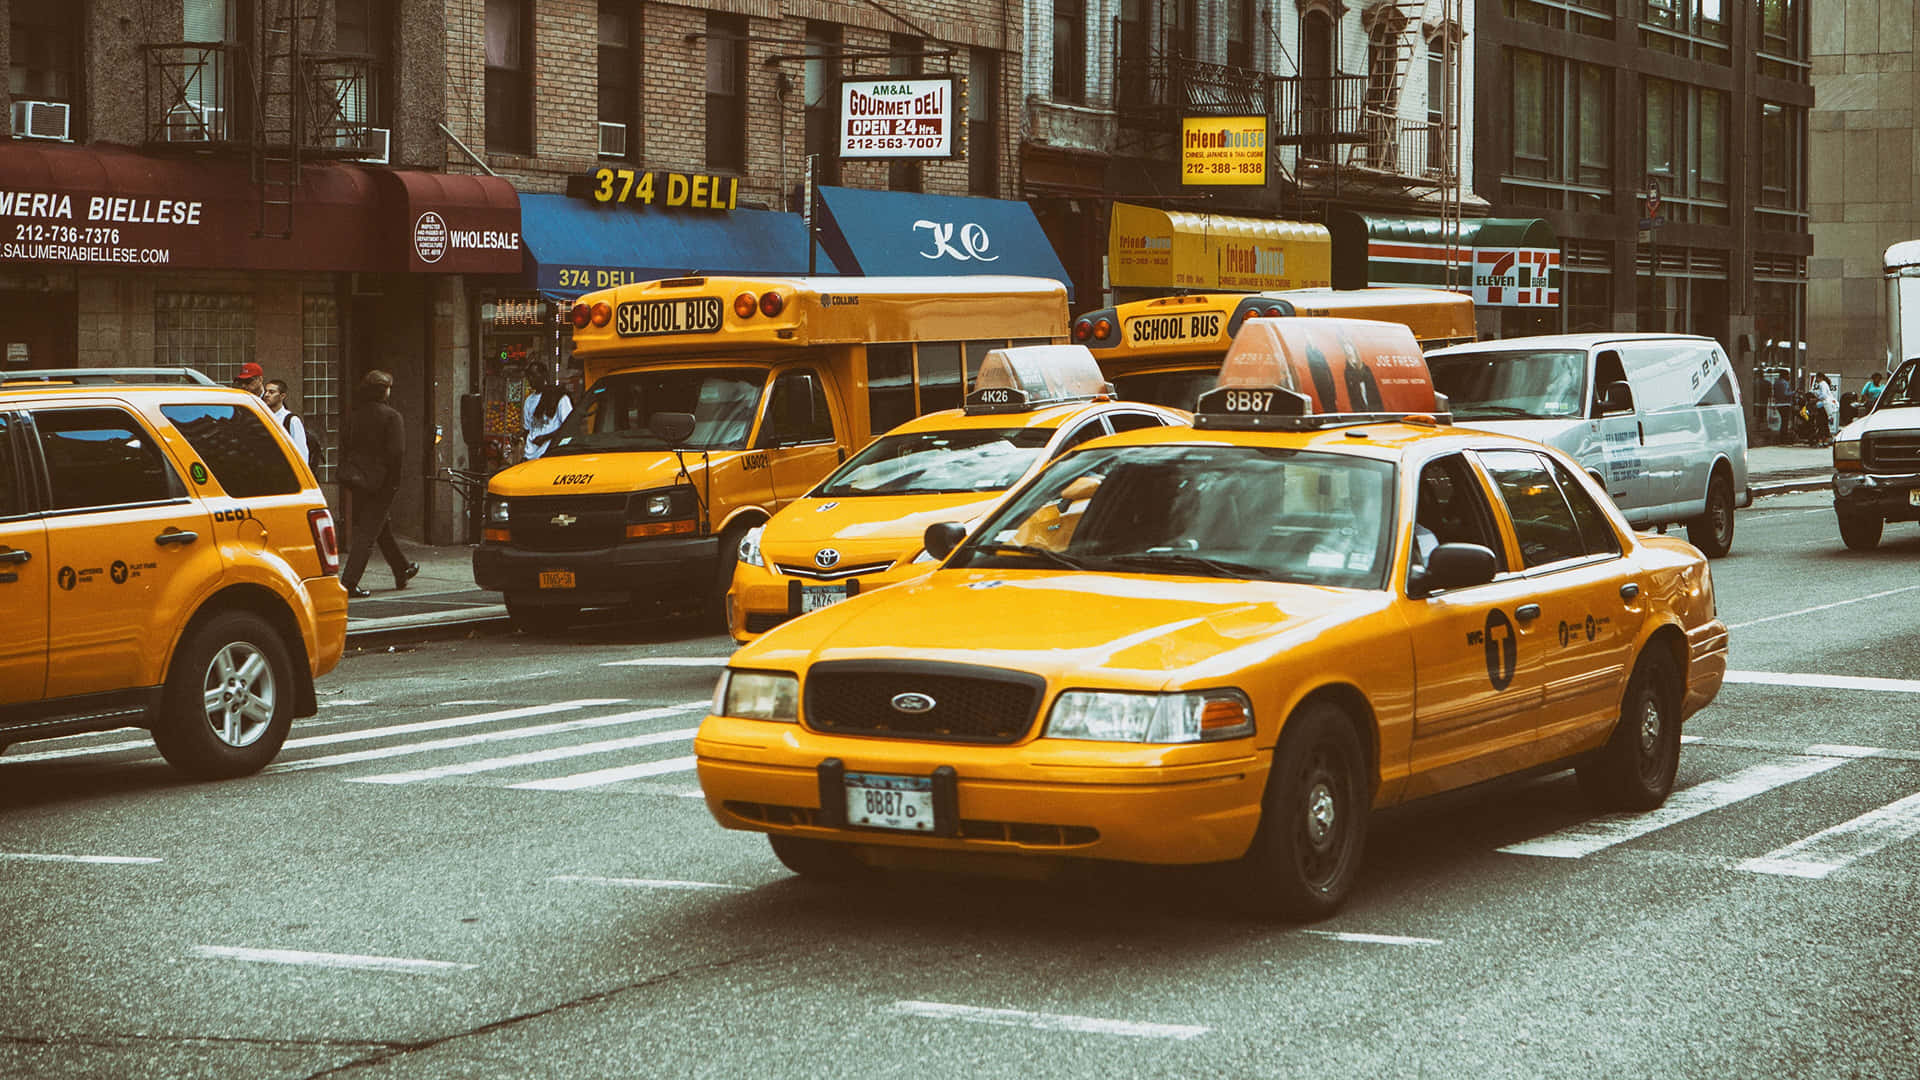 Iconic Yellow Cab in the City Streets Wallpaper